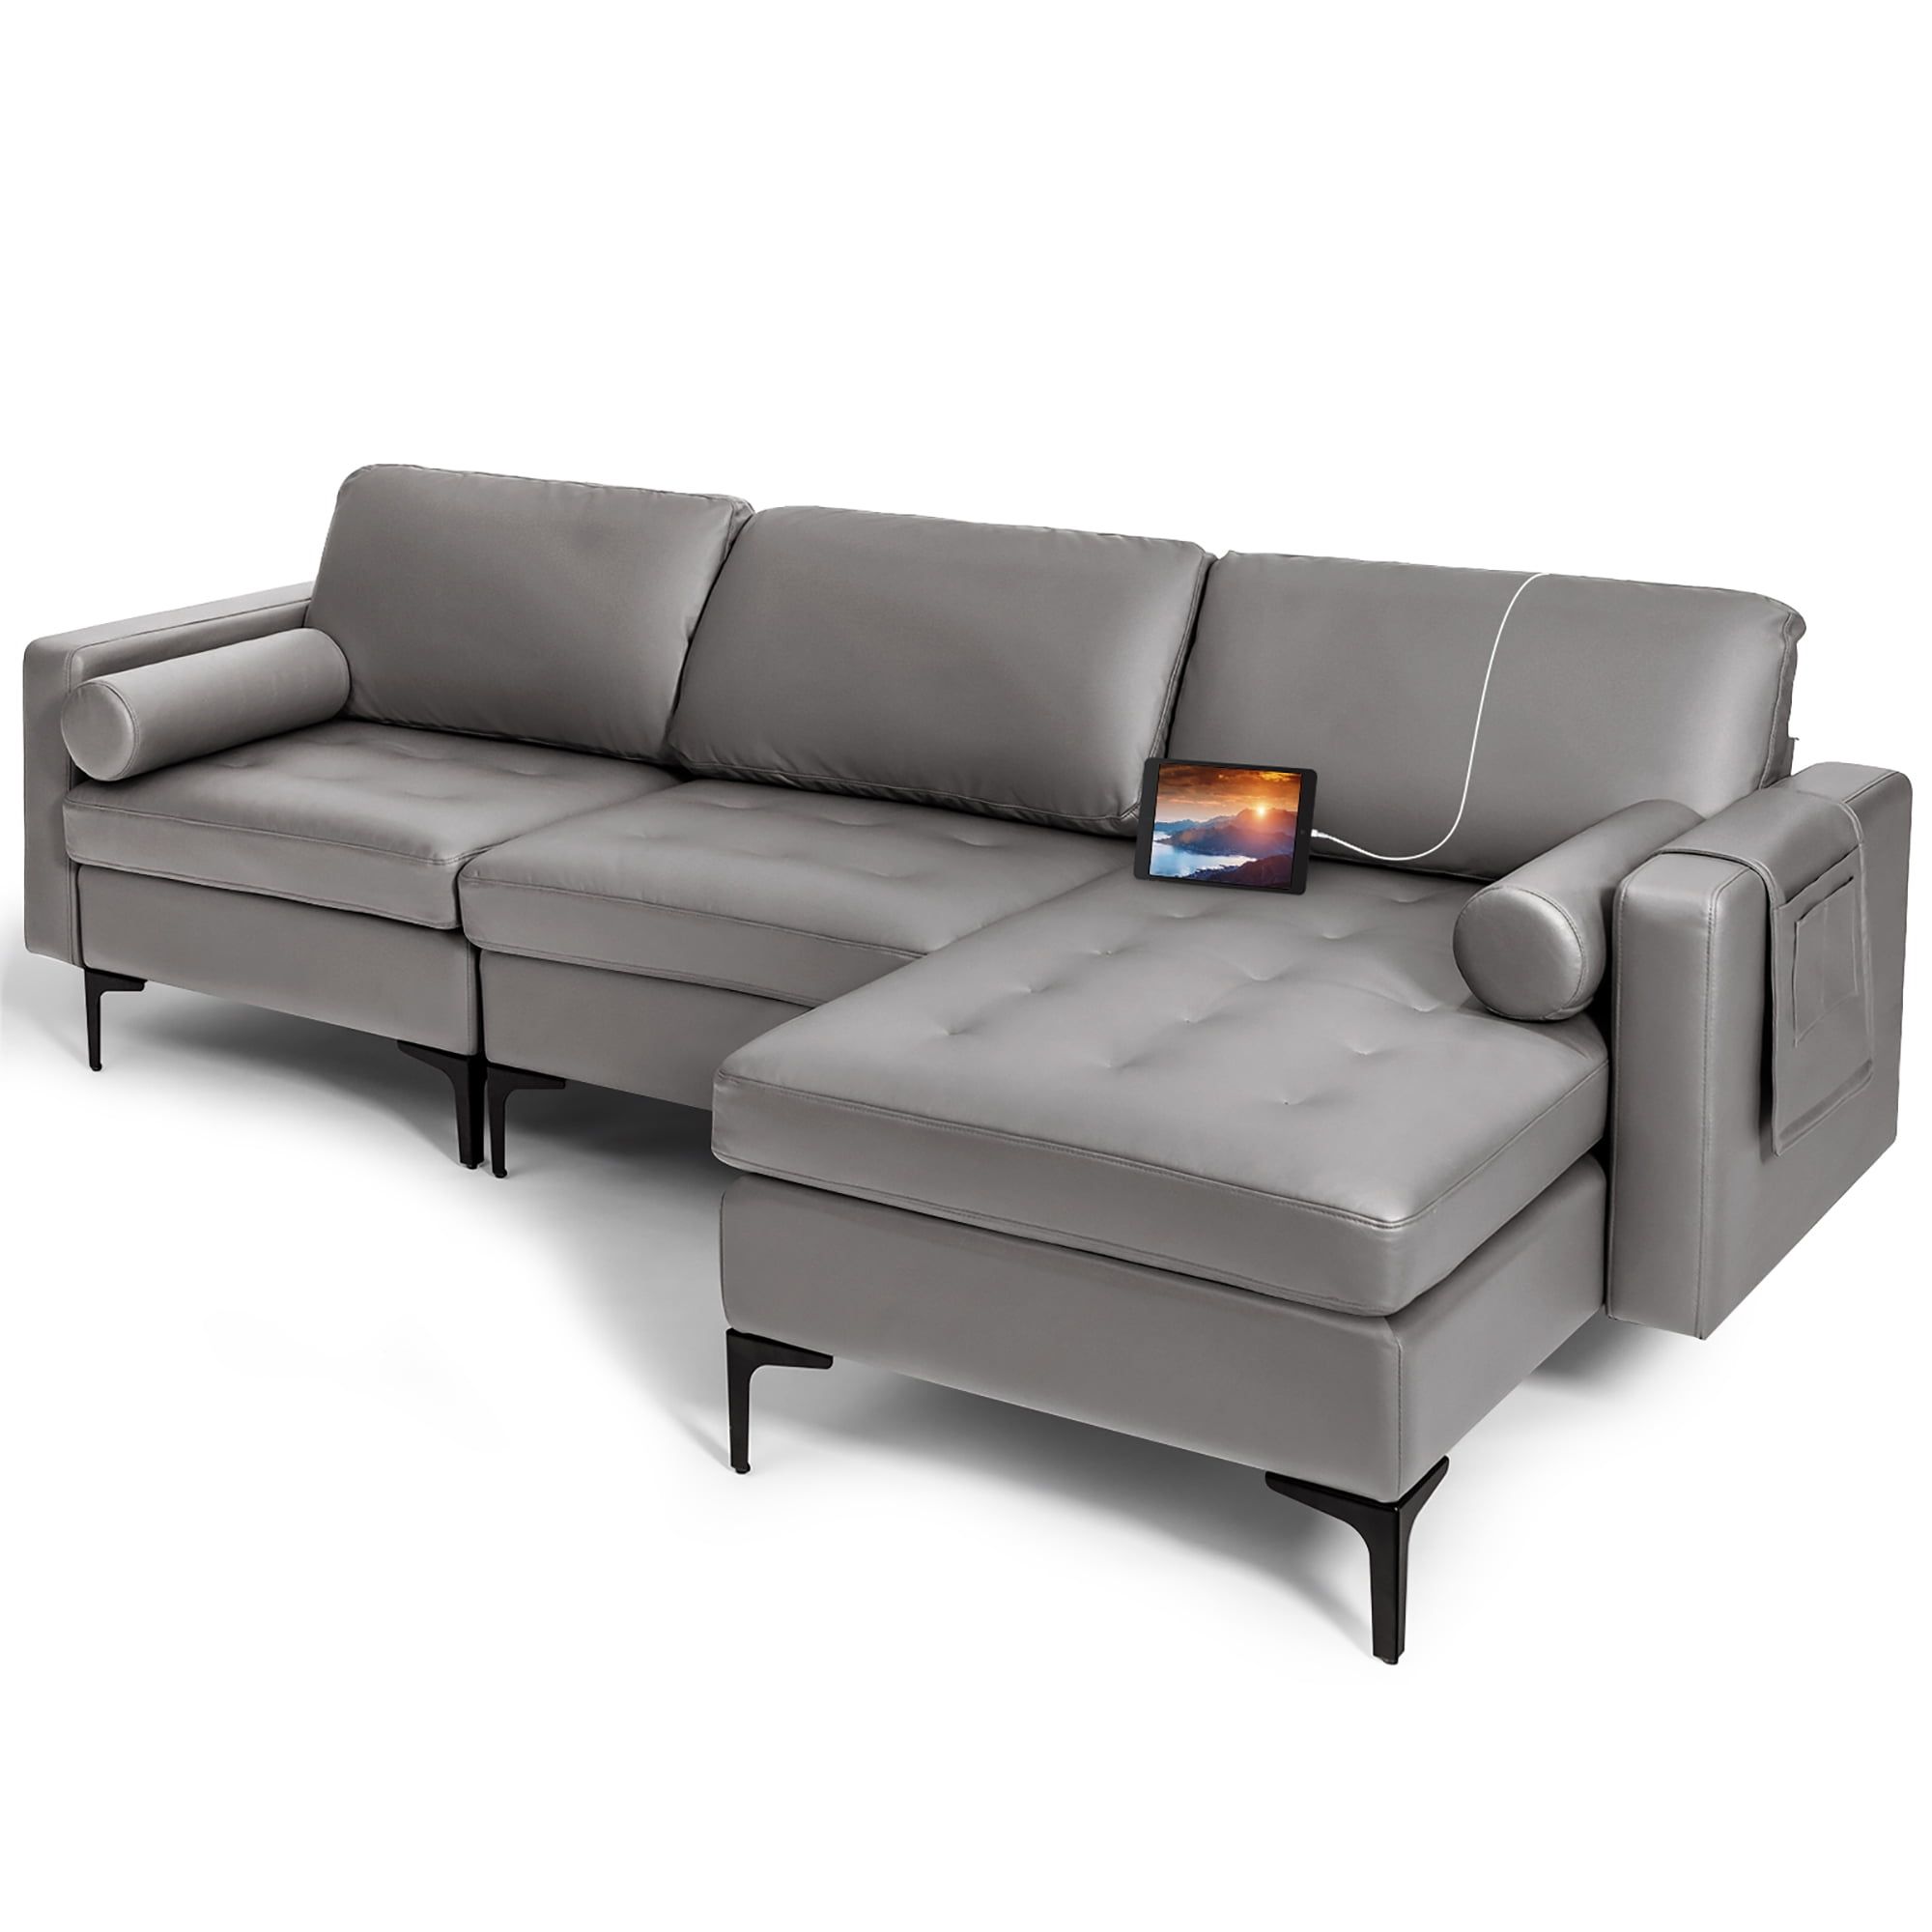 Costway Modular L Shaped 3 Seat Sectional Sofa W/ Reversible Chaise & 2 Usb  Ports Grey – Walmart Within 3 Seat L Shaped Sofas In Black (View 13 of 15)